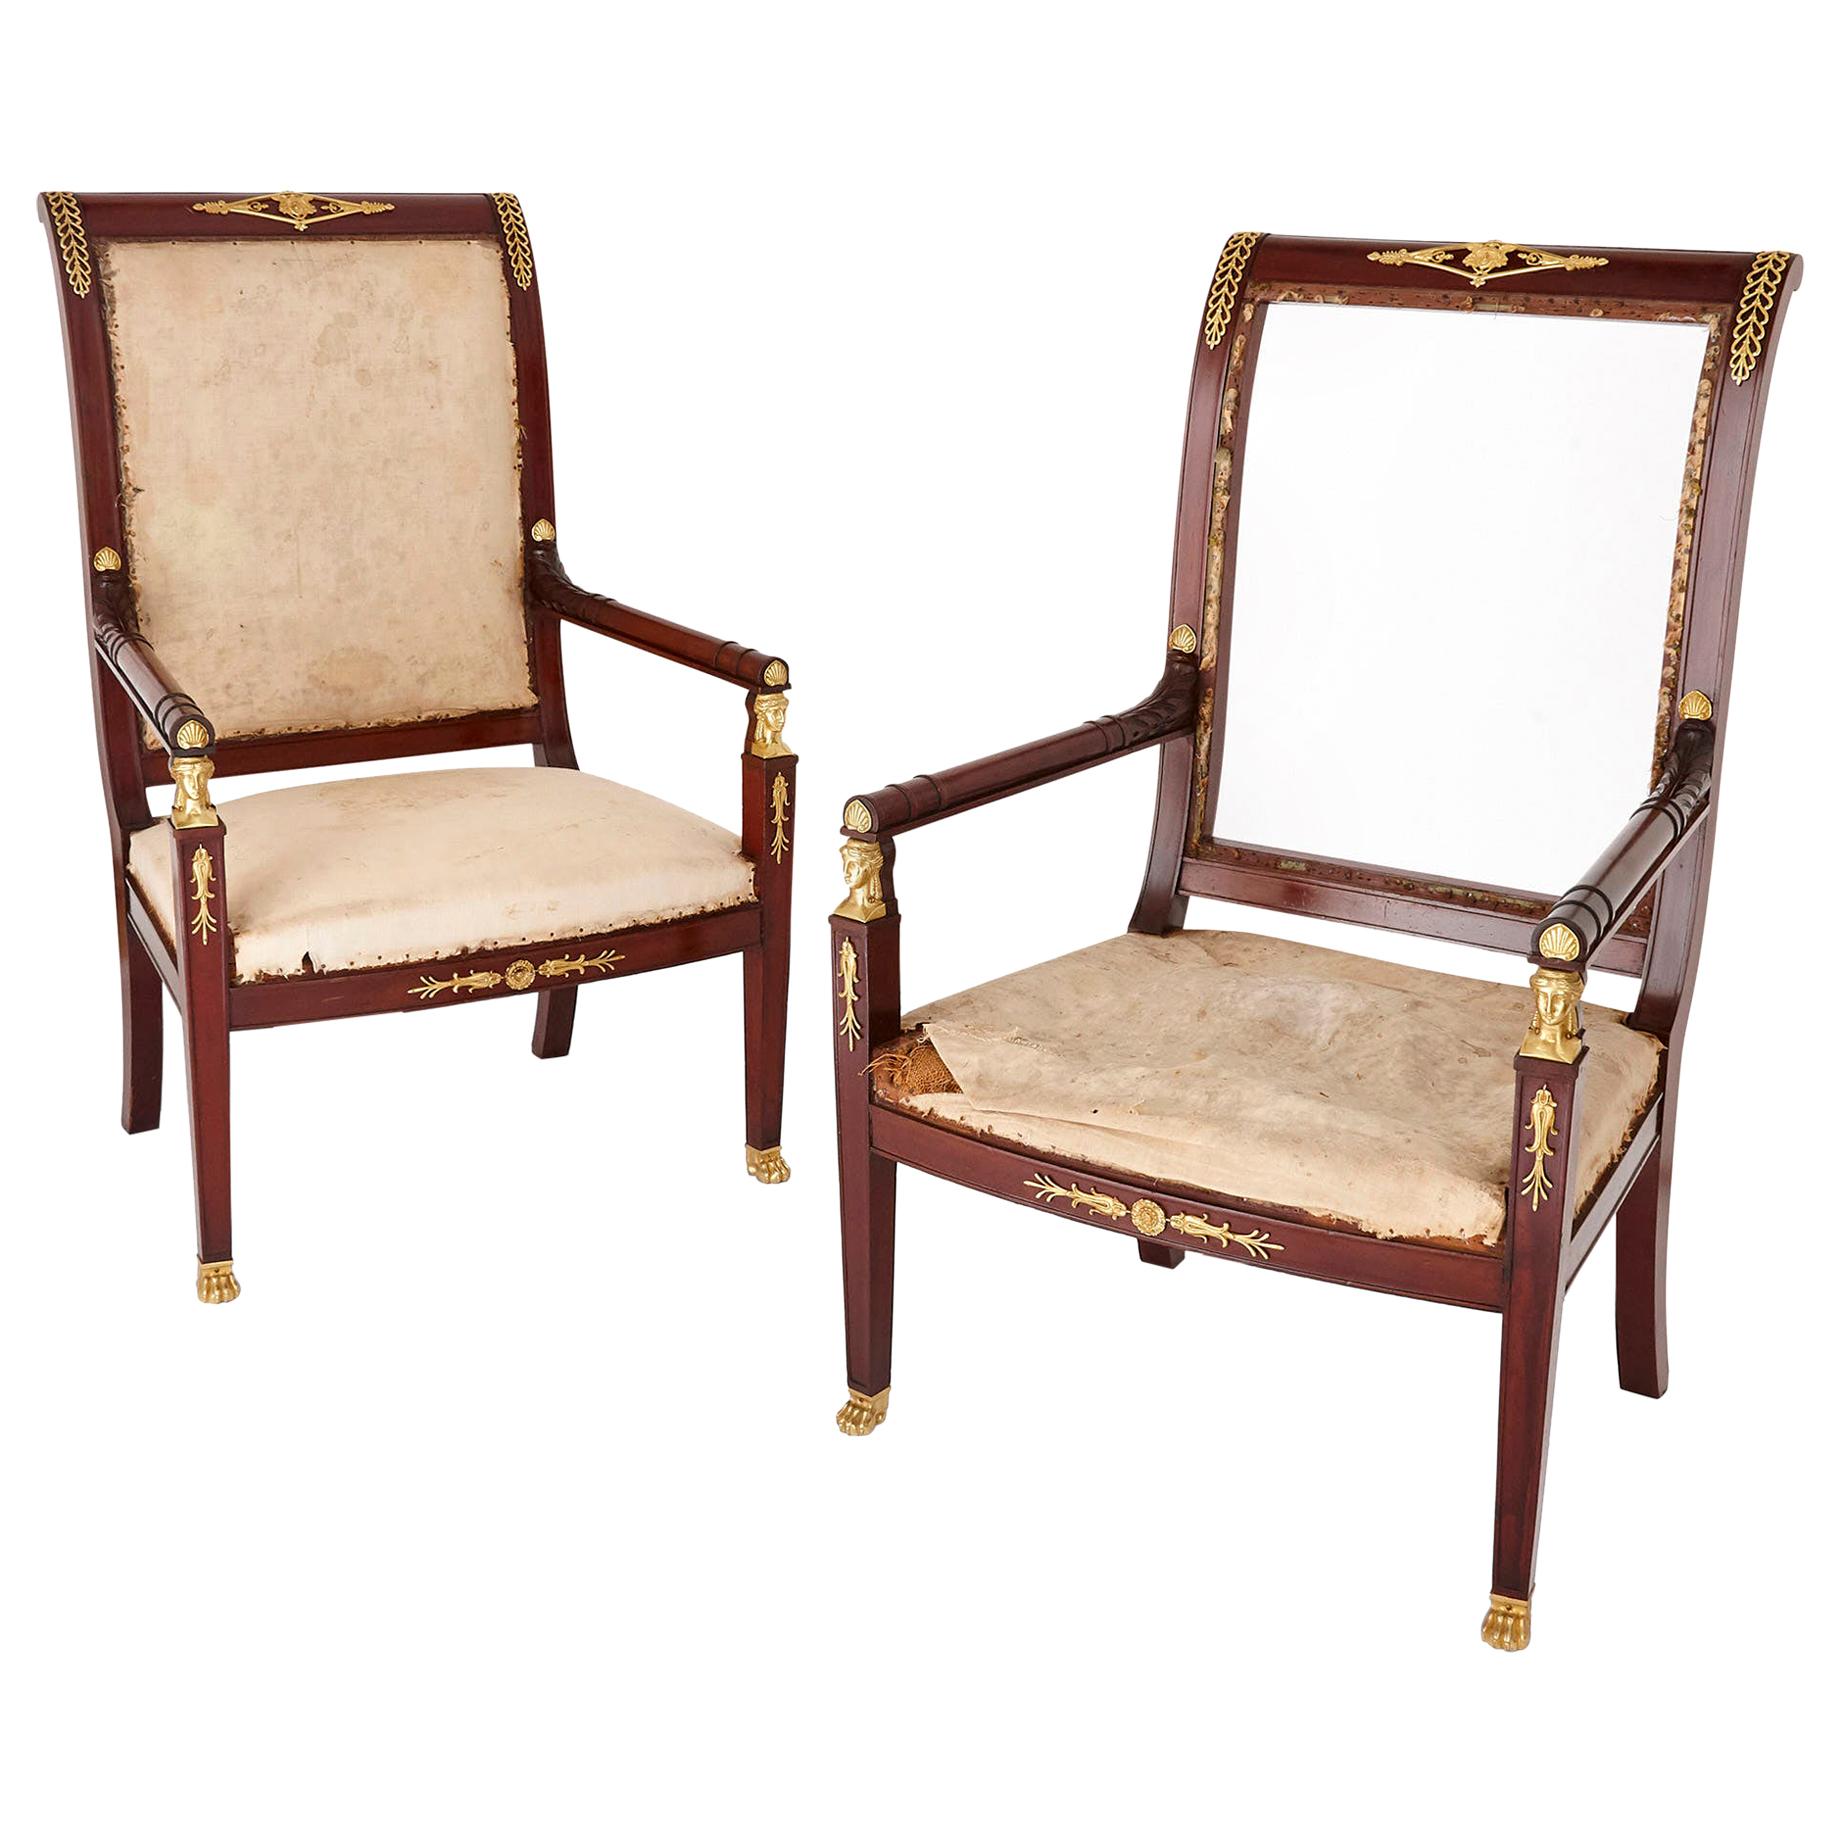 Pair of Antique French Empire Style Mahogany and Gilt Bronze Armchairs